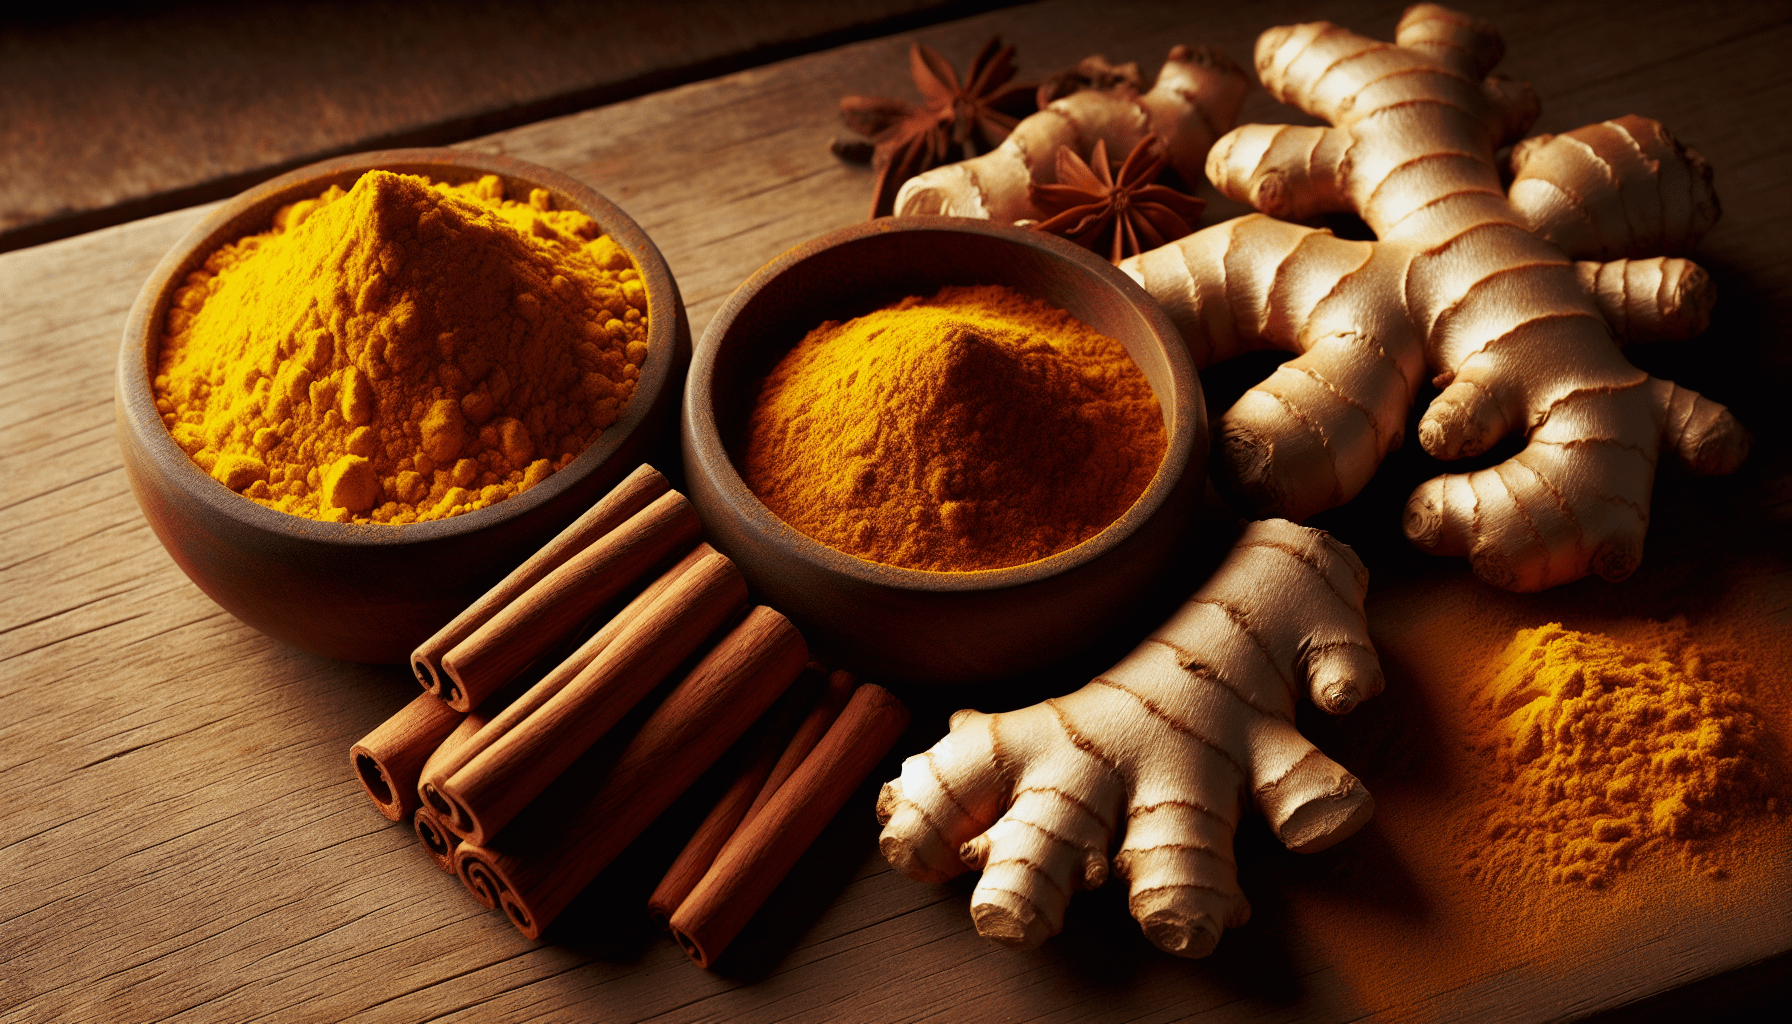 25 how do spices like turmeric cinnamon and ginger contribute to health and well being